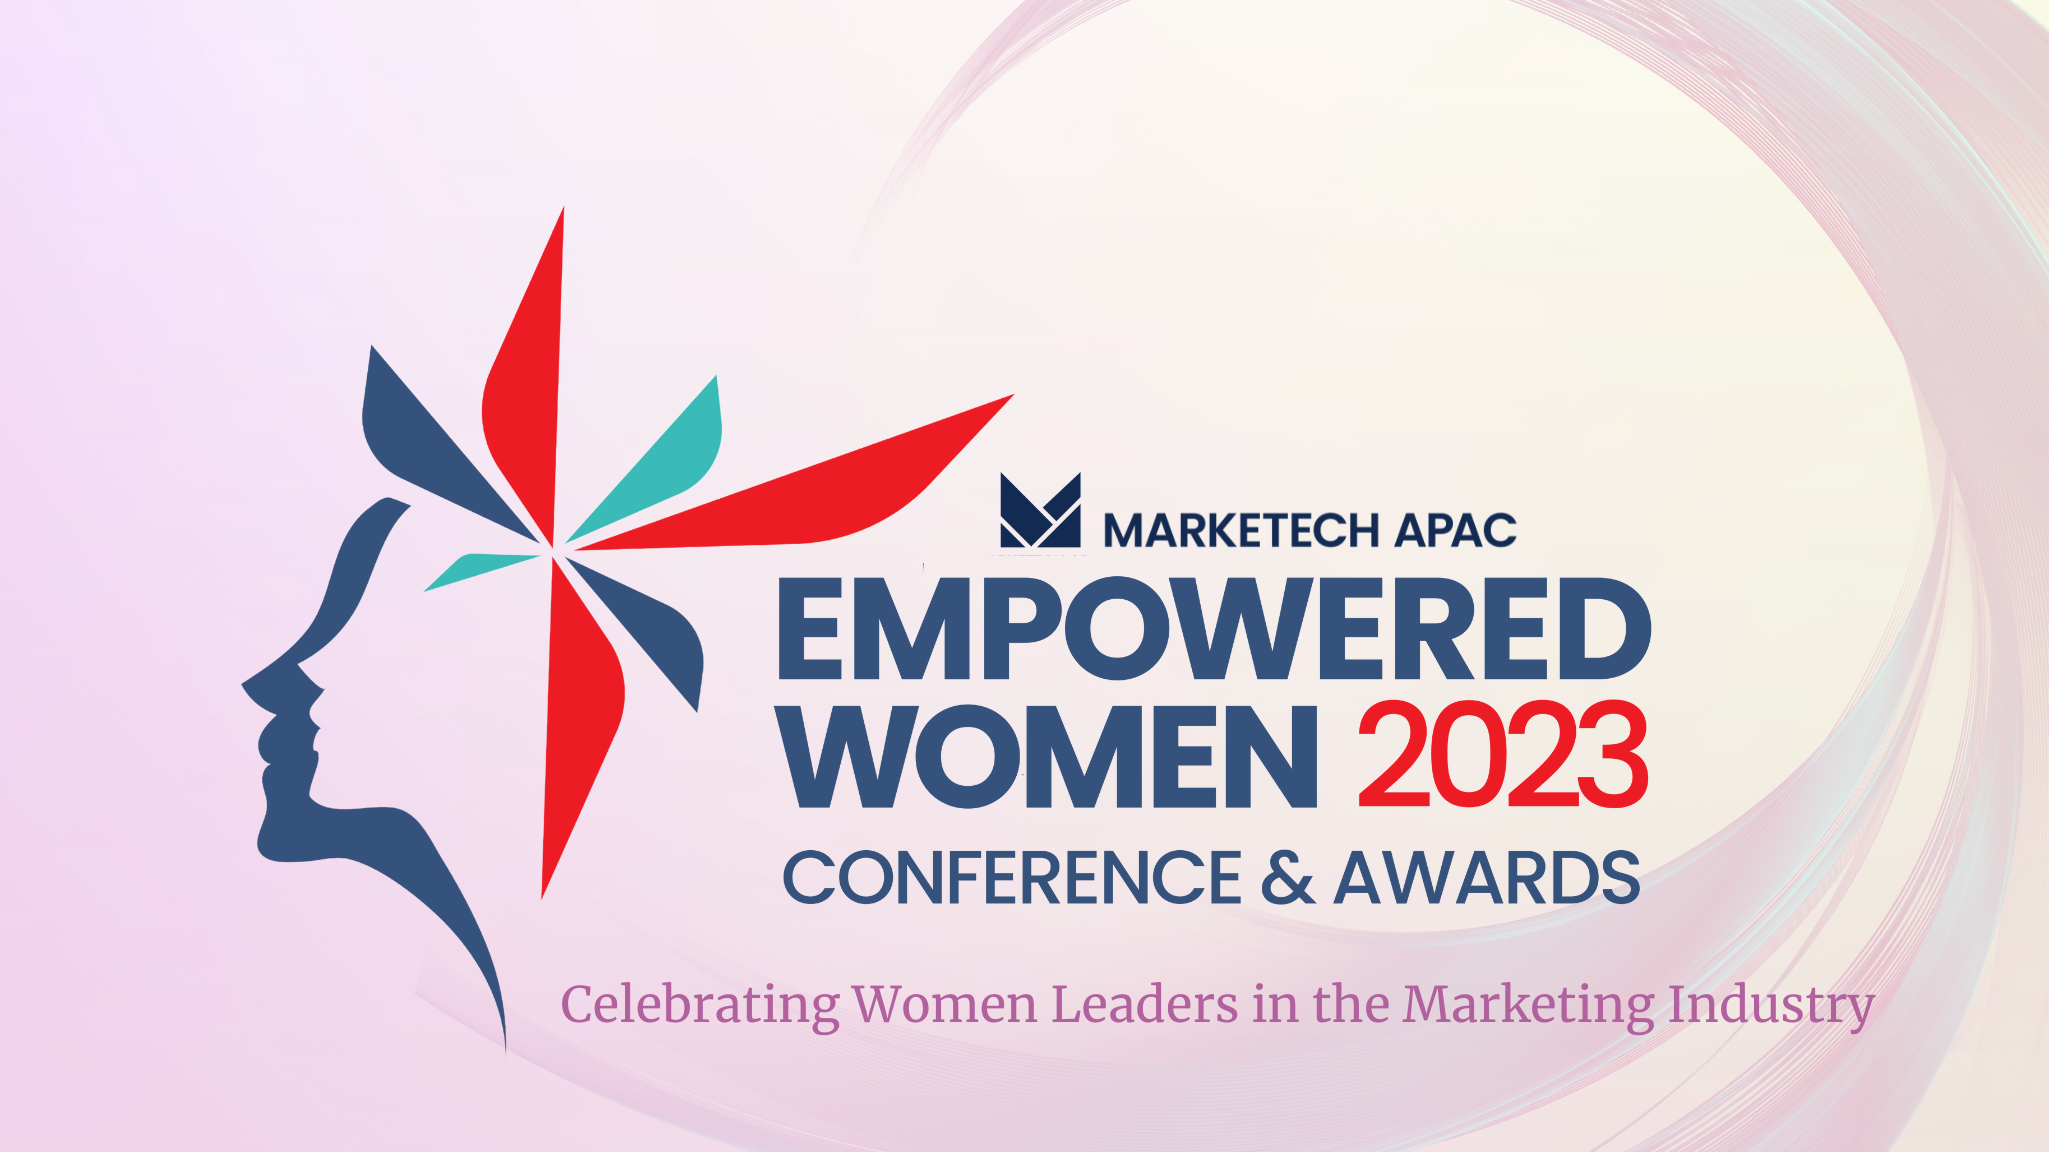 Empowered Women 2023 Conference & Awards MARKETECH APAC